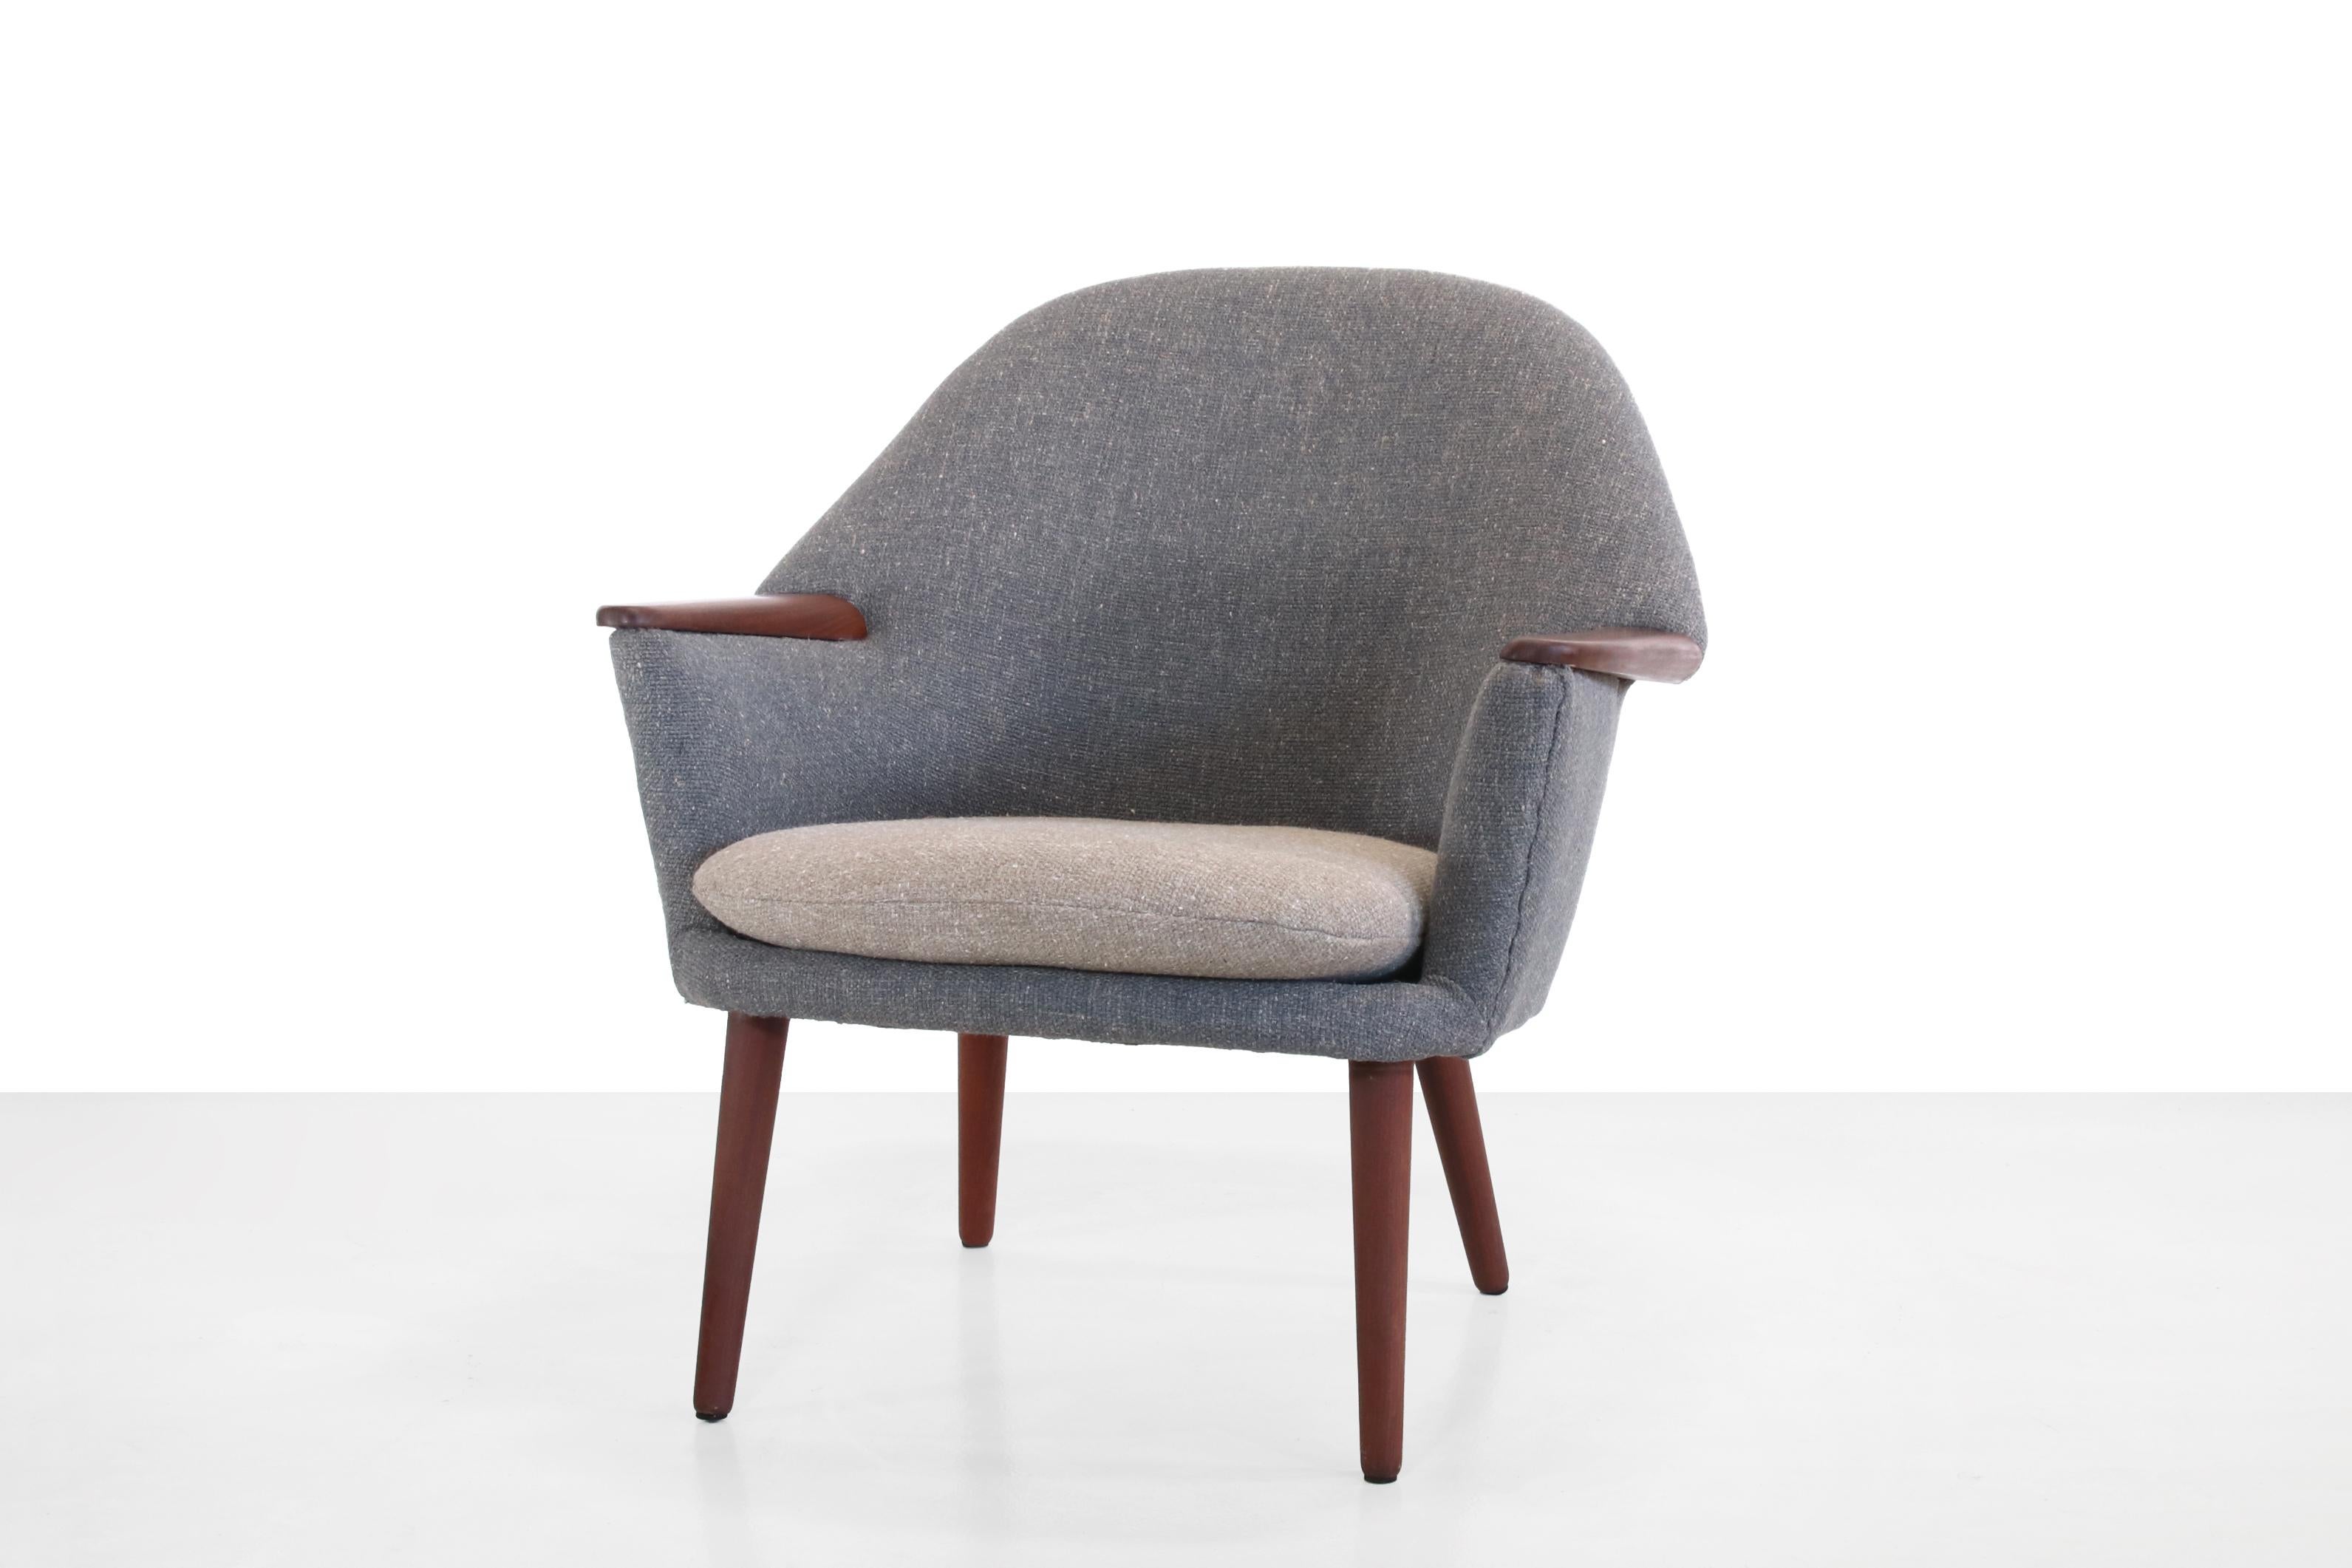 Beautiful Danish design armchair in the style of Nanna Ditzel. This armchair has been reupholstered in a duotone in a desaturated blue and warm grey colored fabric with a beautiful coarse structure and has solid teak legs and armrests. This lounge